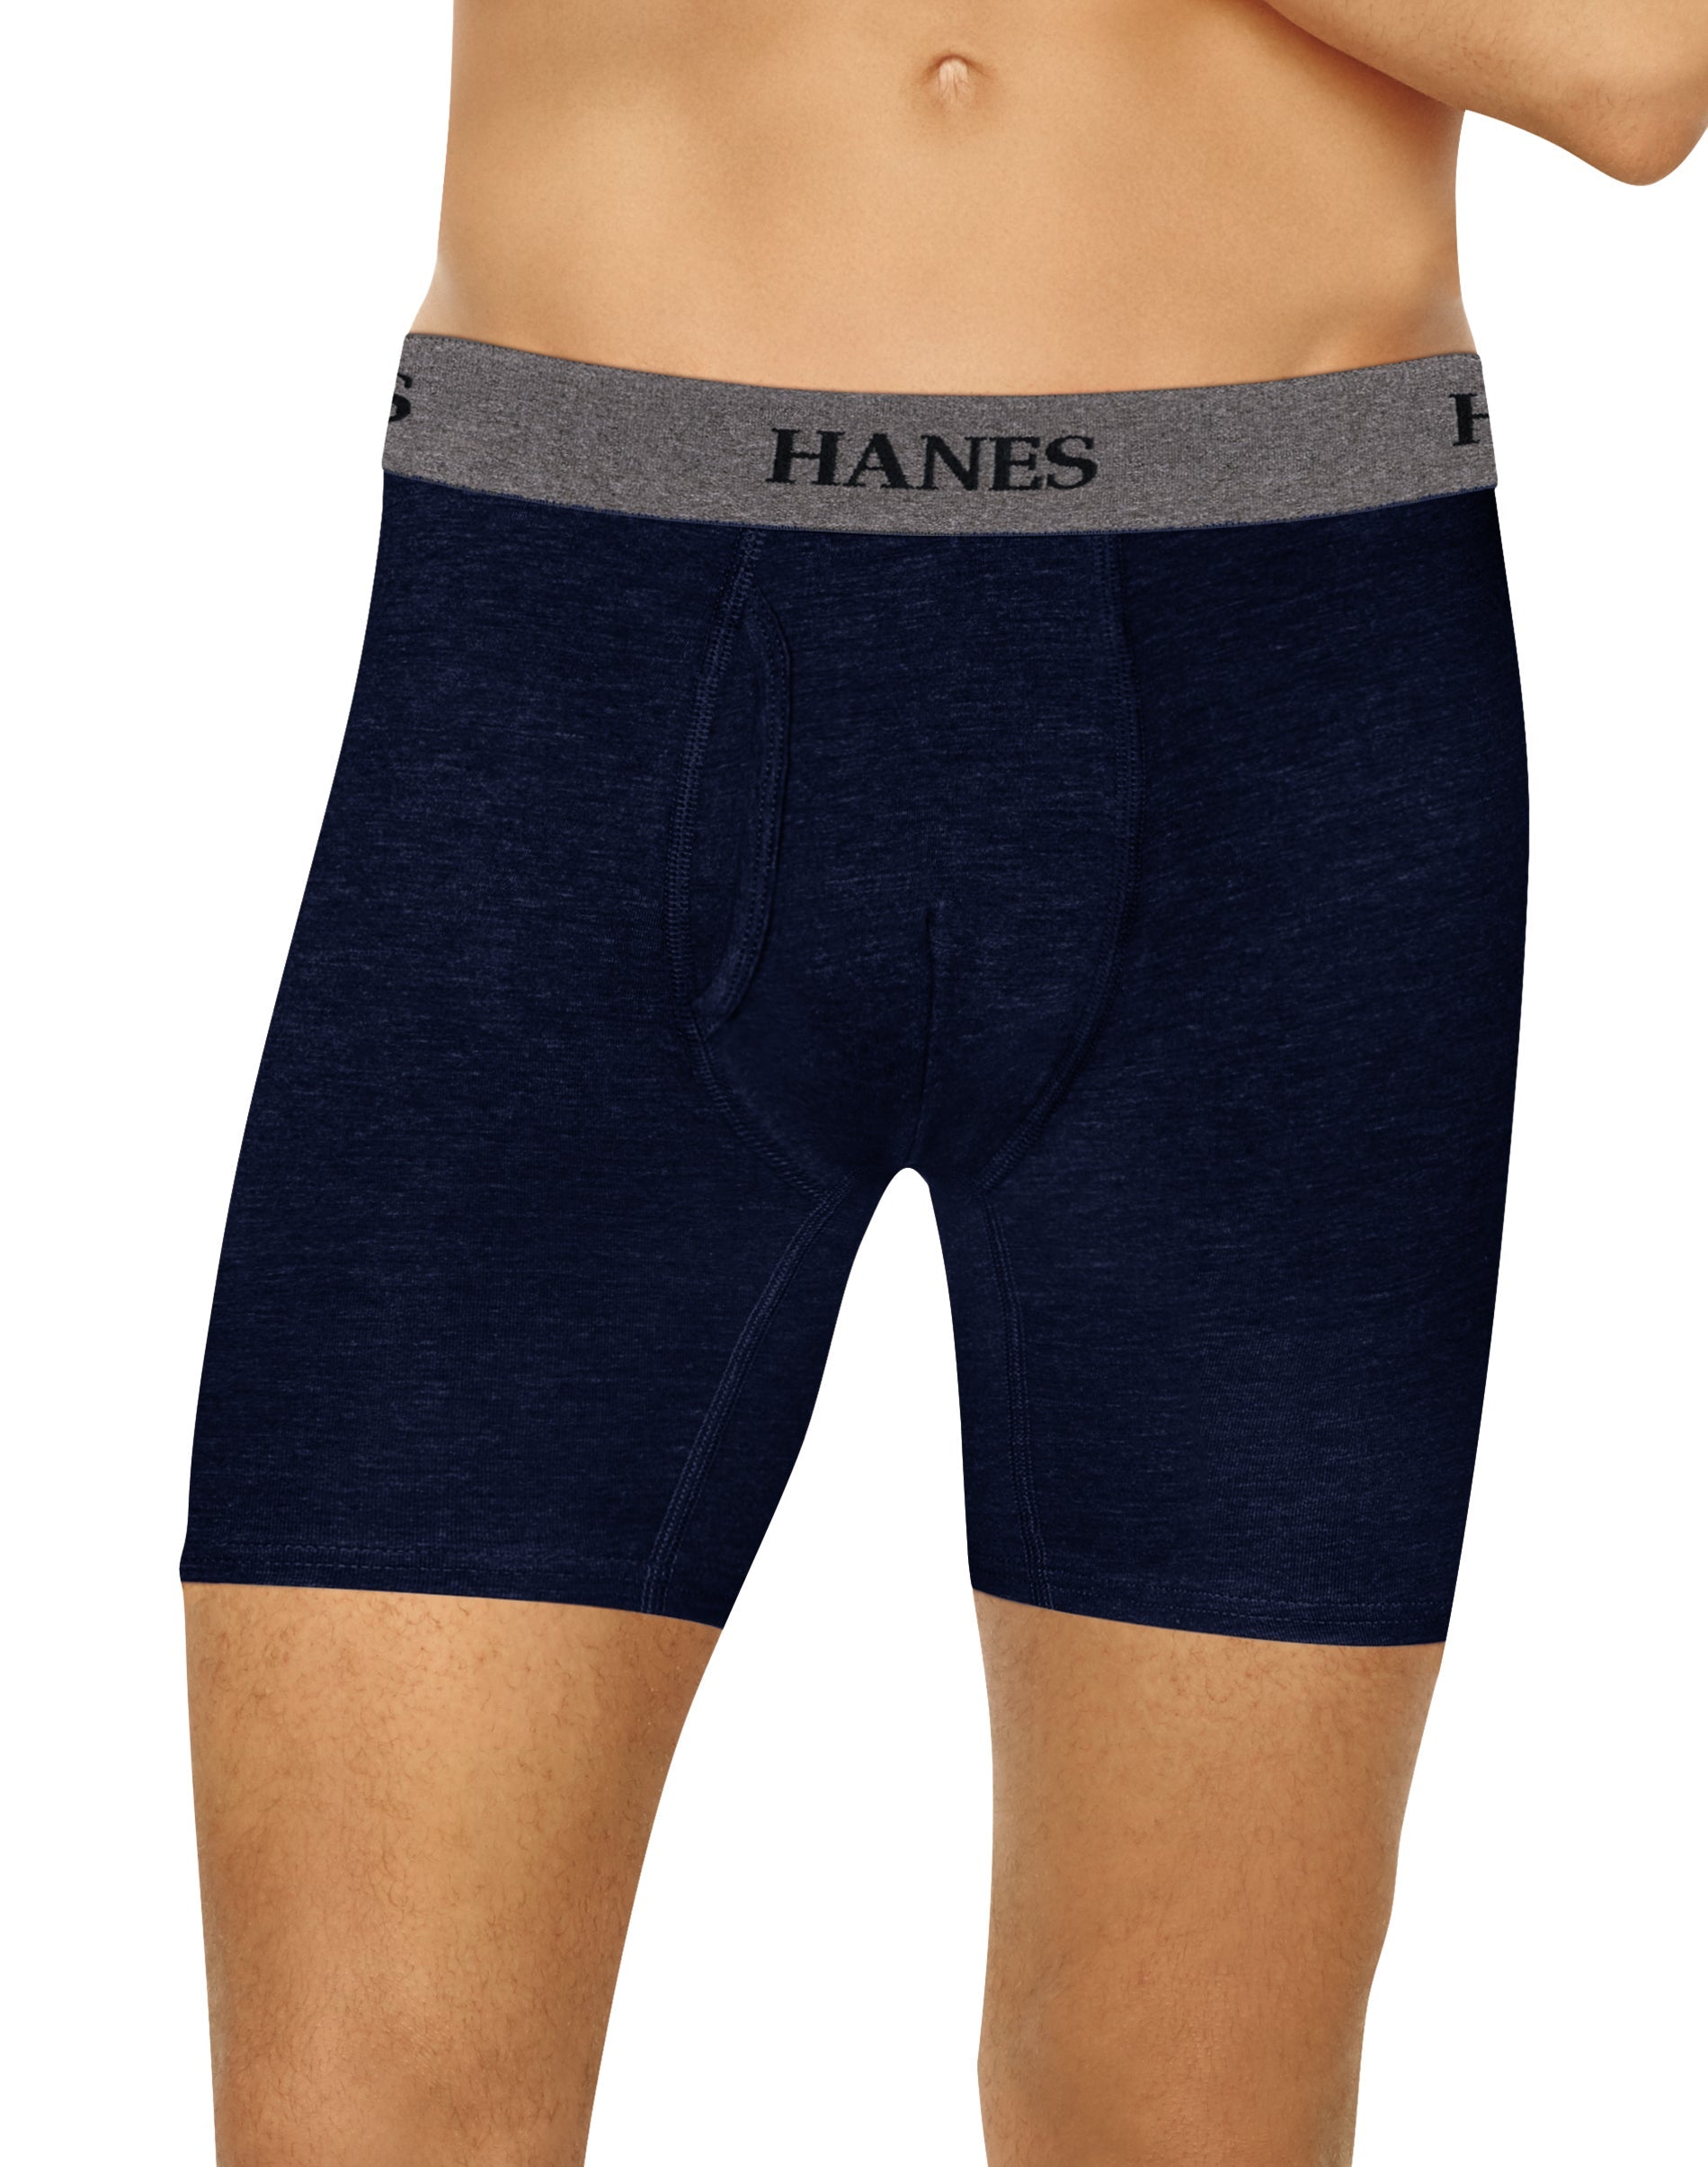 Hanes Briefs in 100% cotton for men's (Pack of 3)